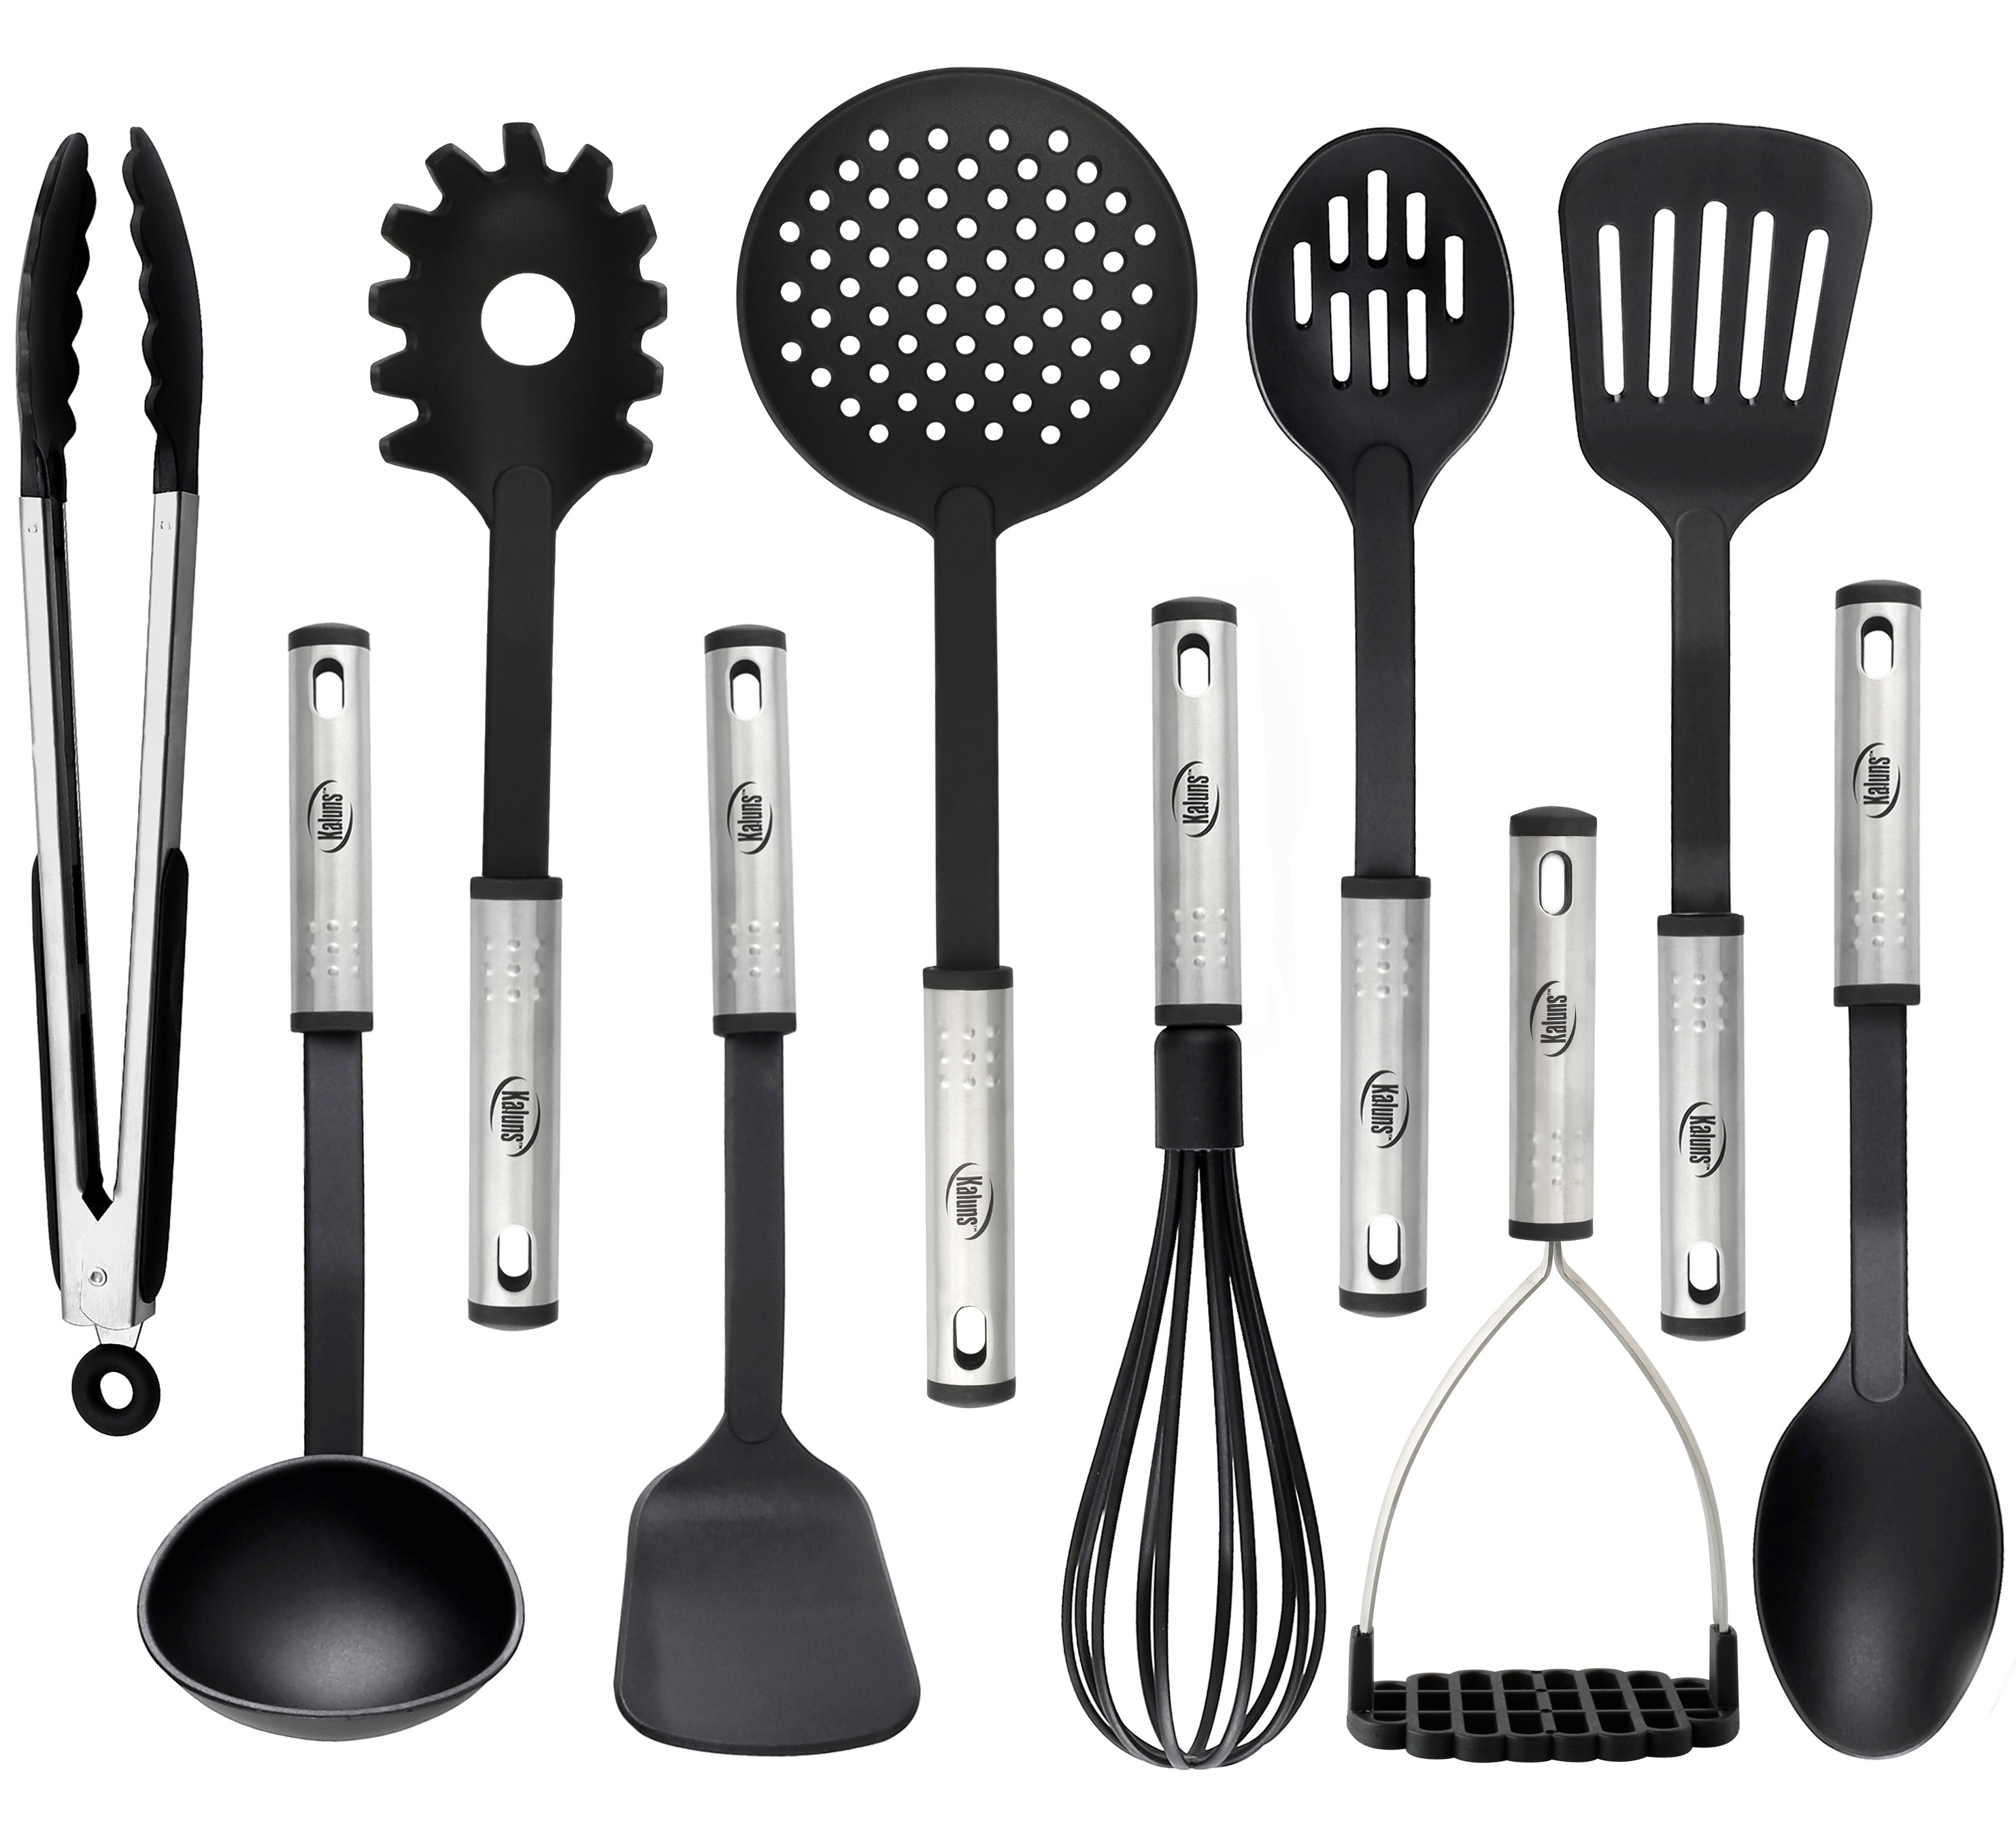 Kaluns Kitchen Utensil Set - 24 Nylon Stainless Steel Cooking Supplies - Non-Stick and Heat Resistant Cookware Set - Cooking Utensils, Size: 24 Pcs